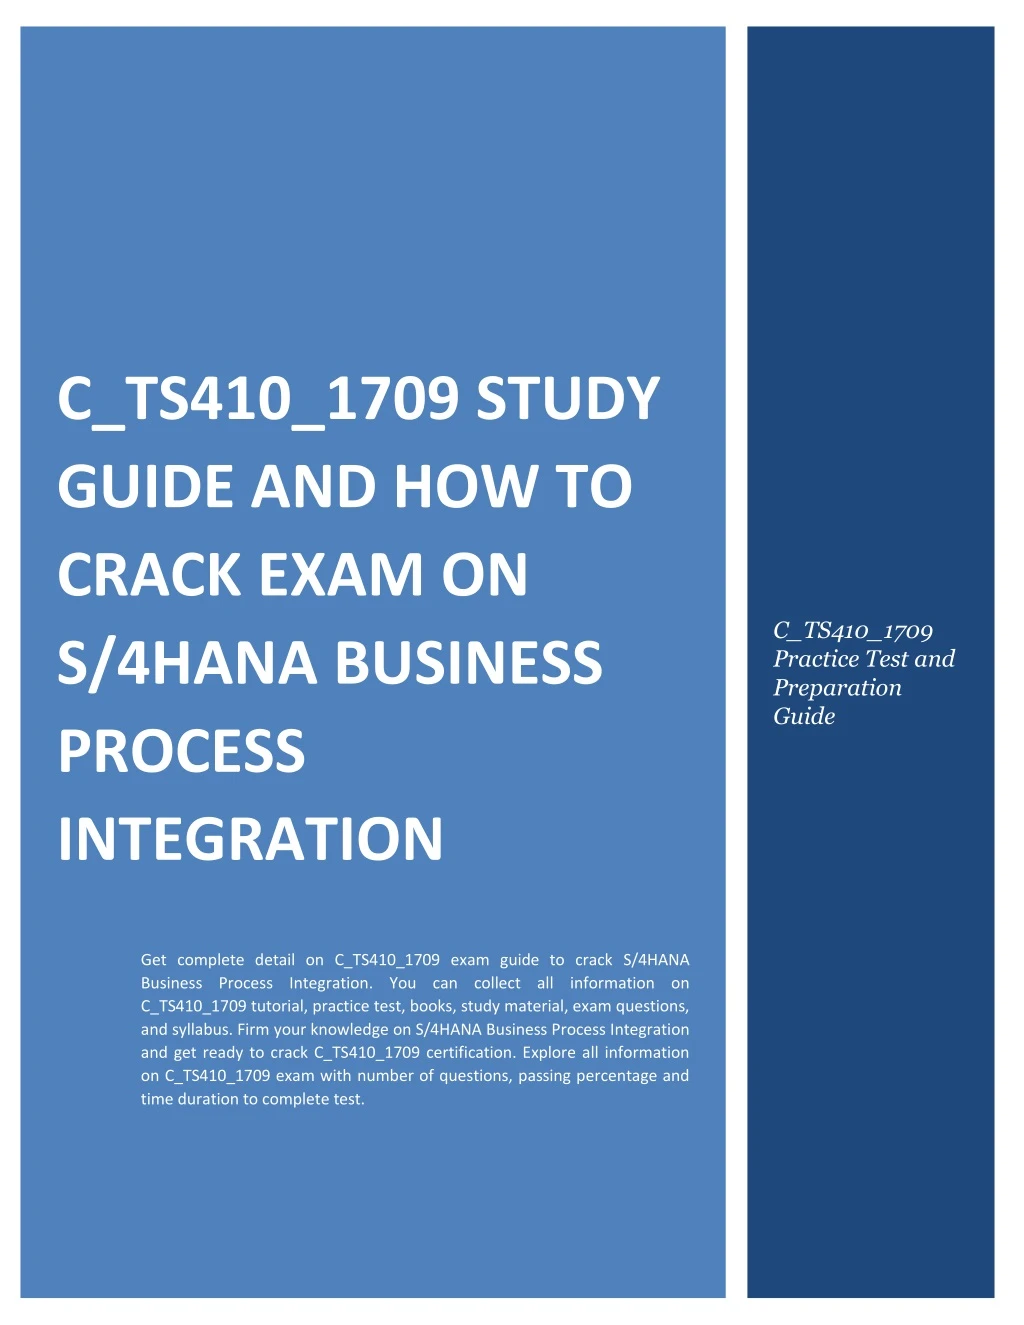 c ts410 1709 study guide and how to crack exam